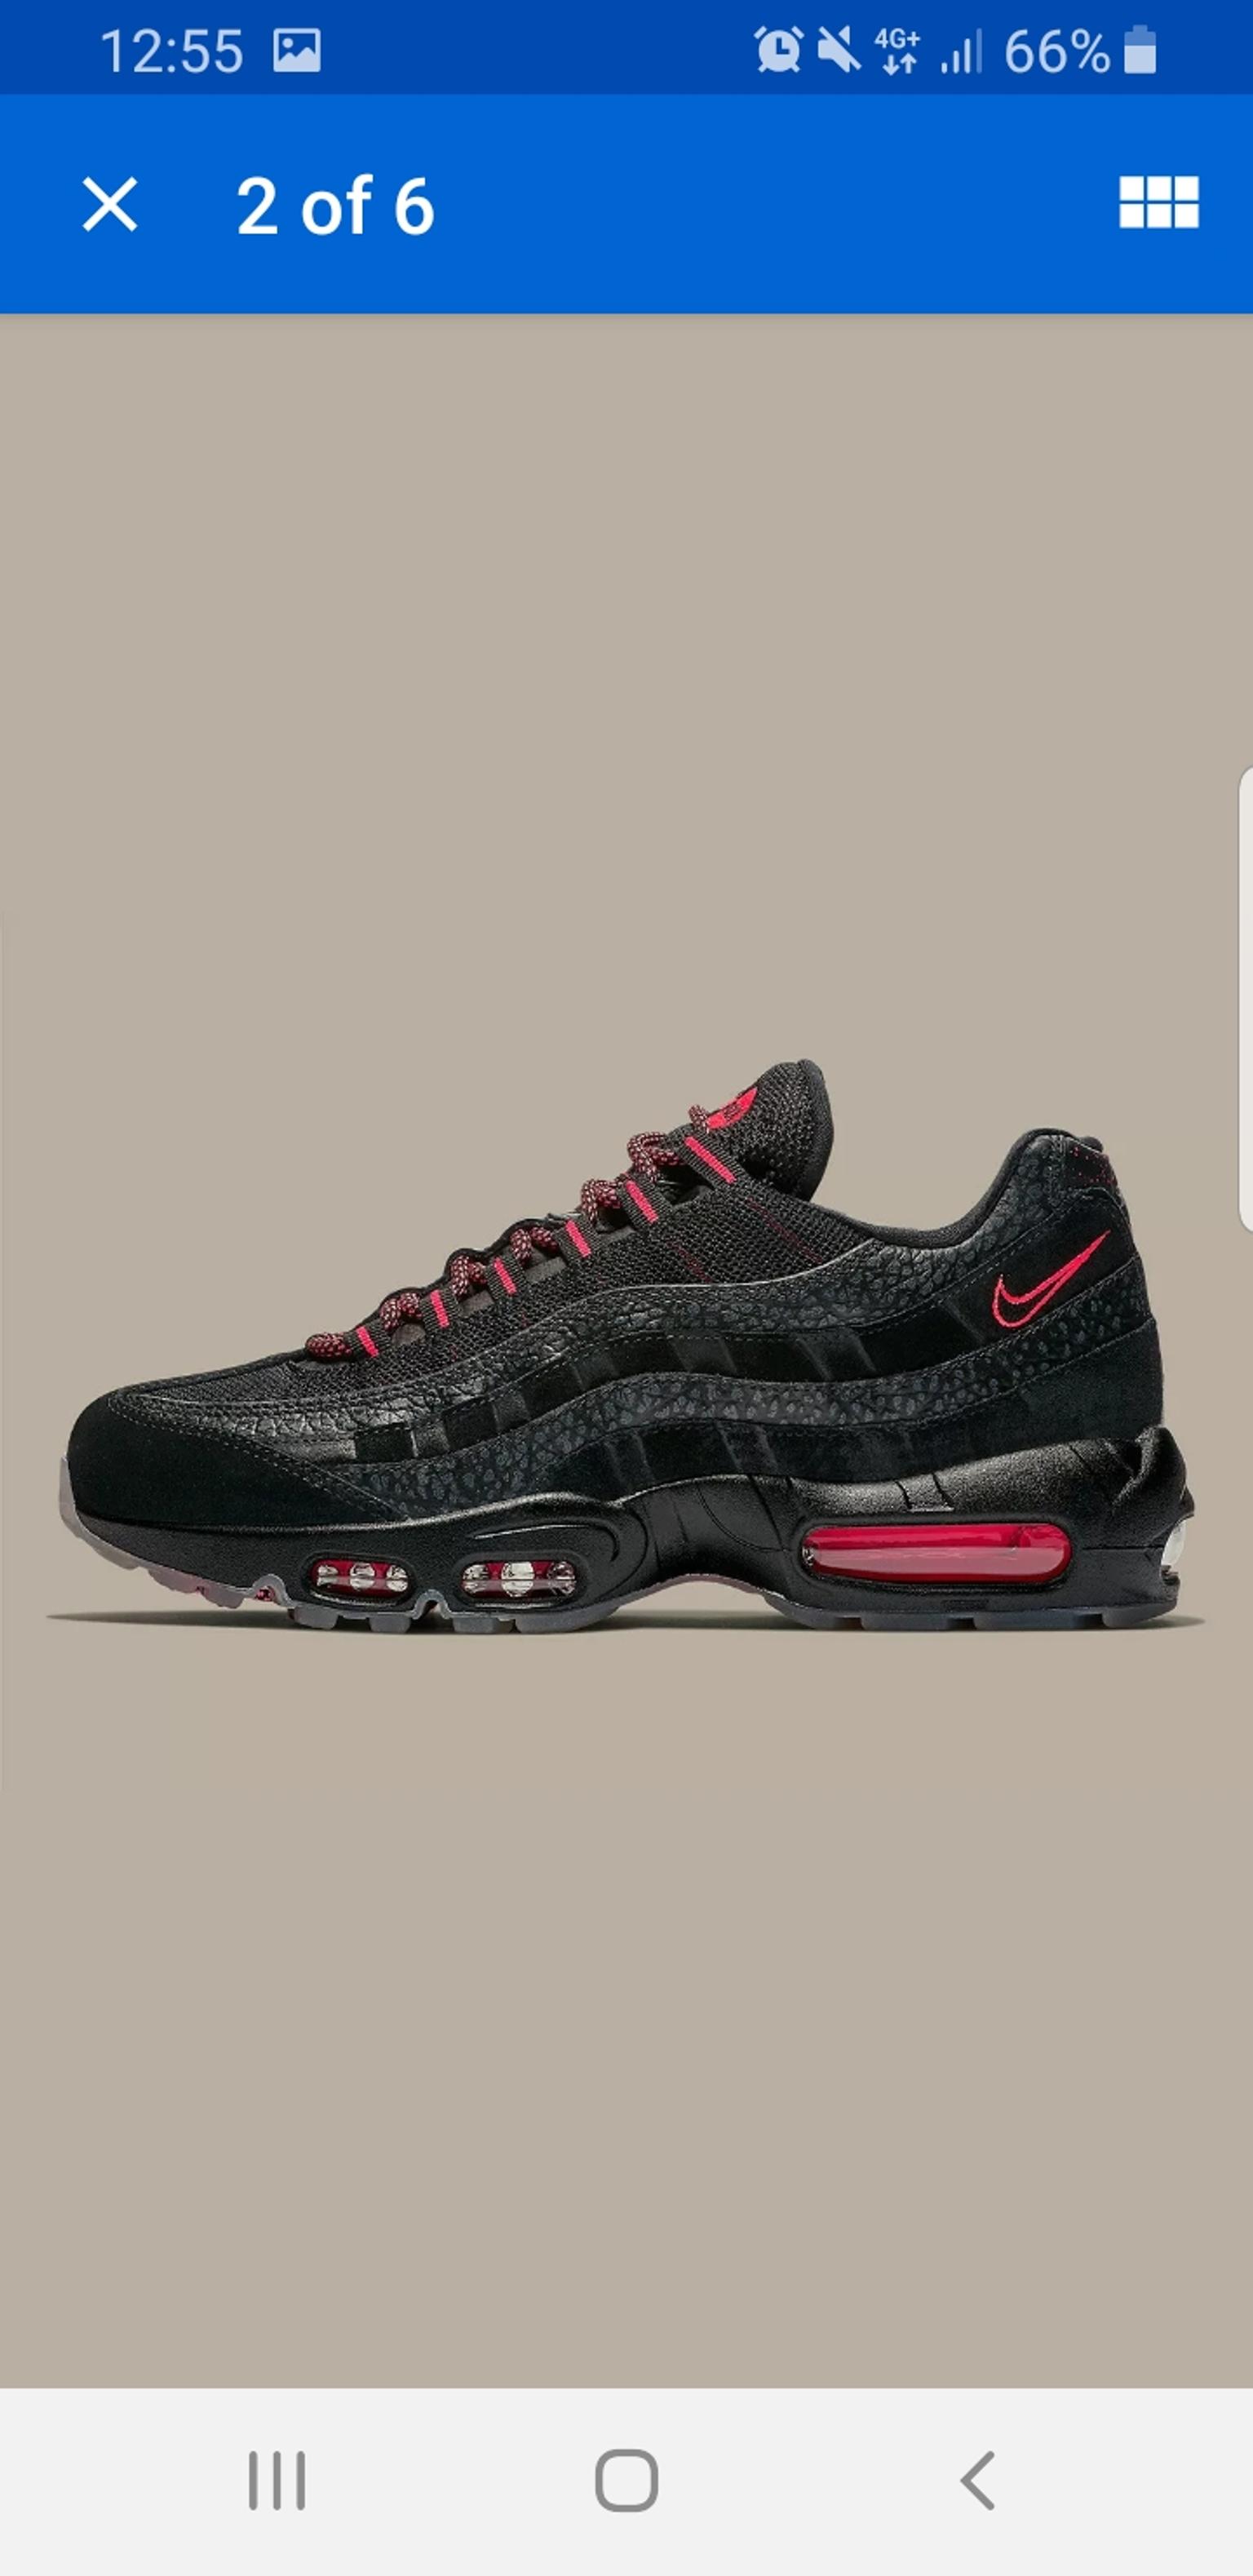 nike 95 limited edition